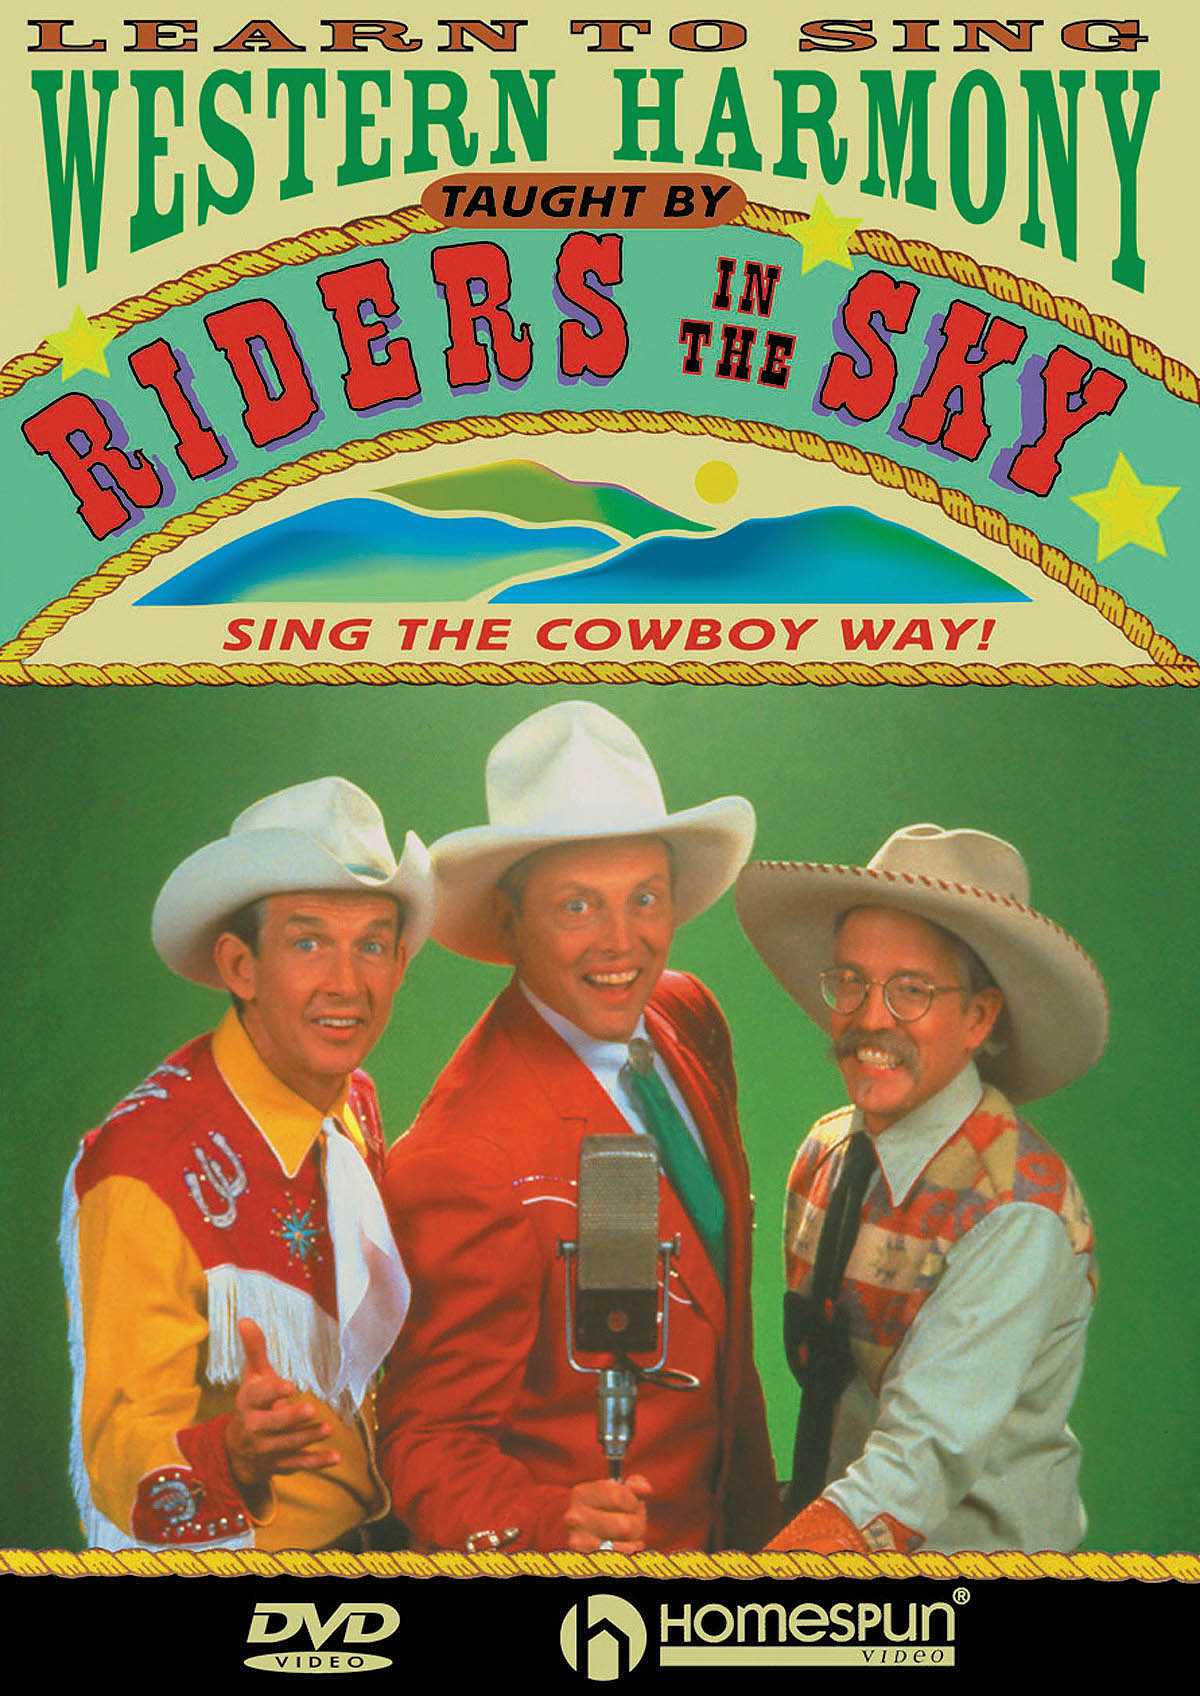 Image 1 of DVD - Learn to Sing Western Harmony - SKU# 300-DVD219 : Product Type Media : Elderly Instruments